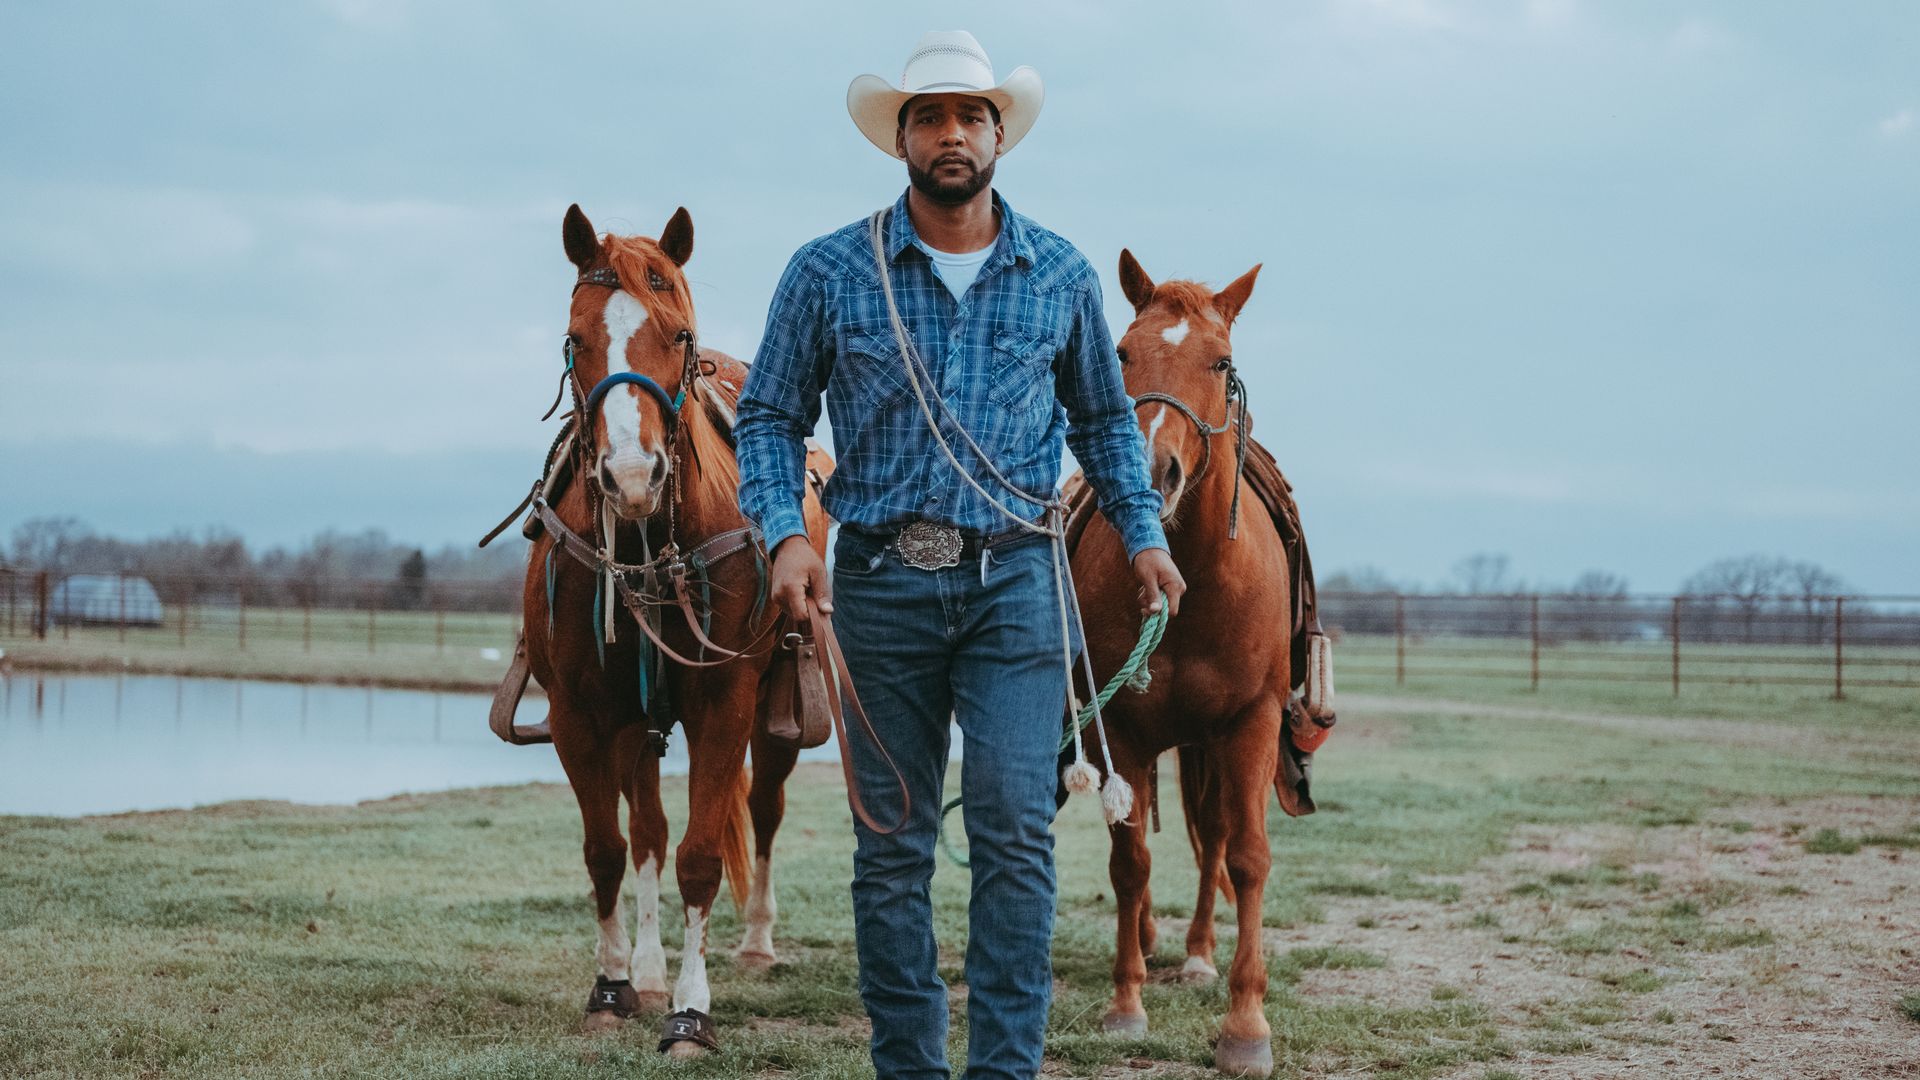 A Black cowboy directing two horses behind him walks straight ahead with a pond behind him.